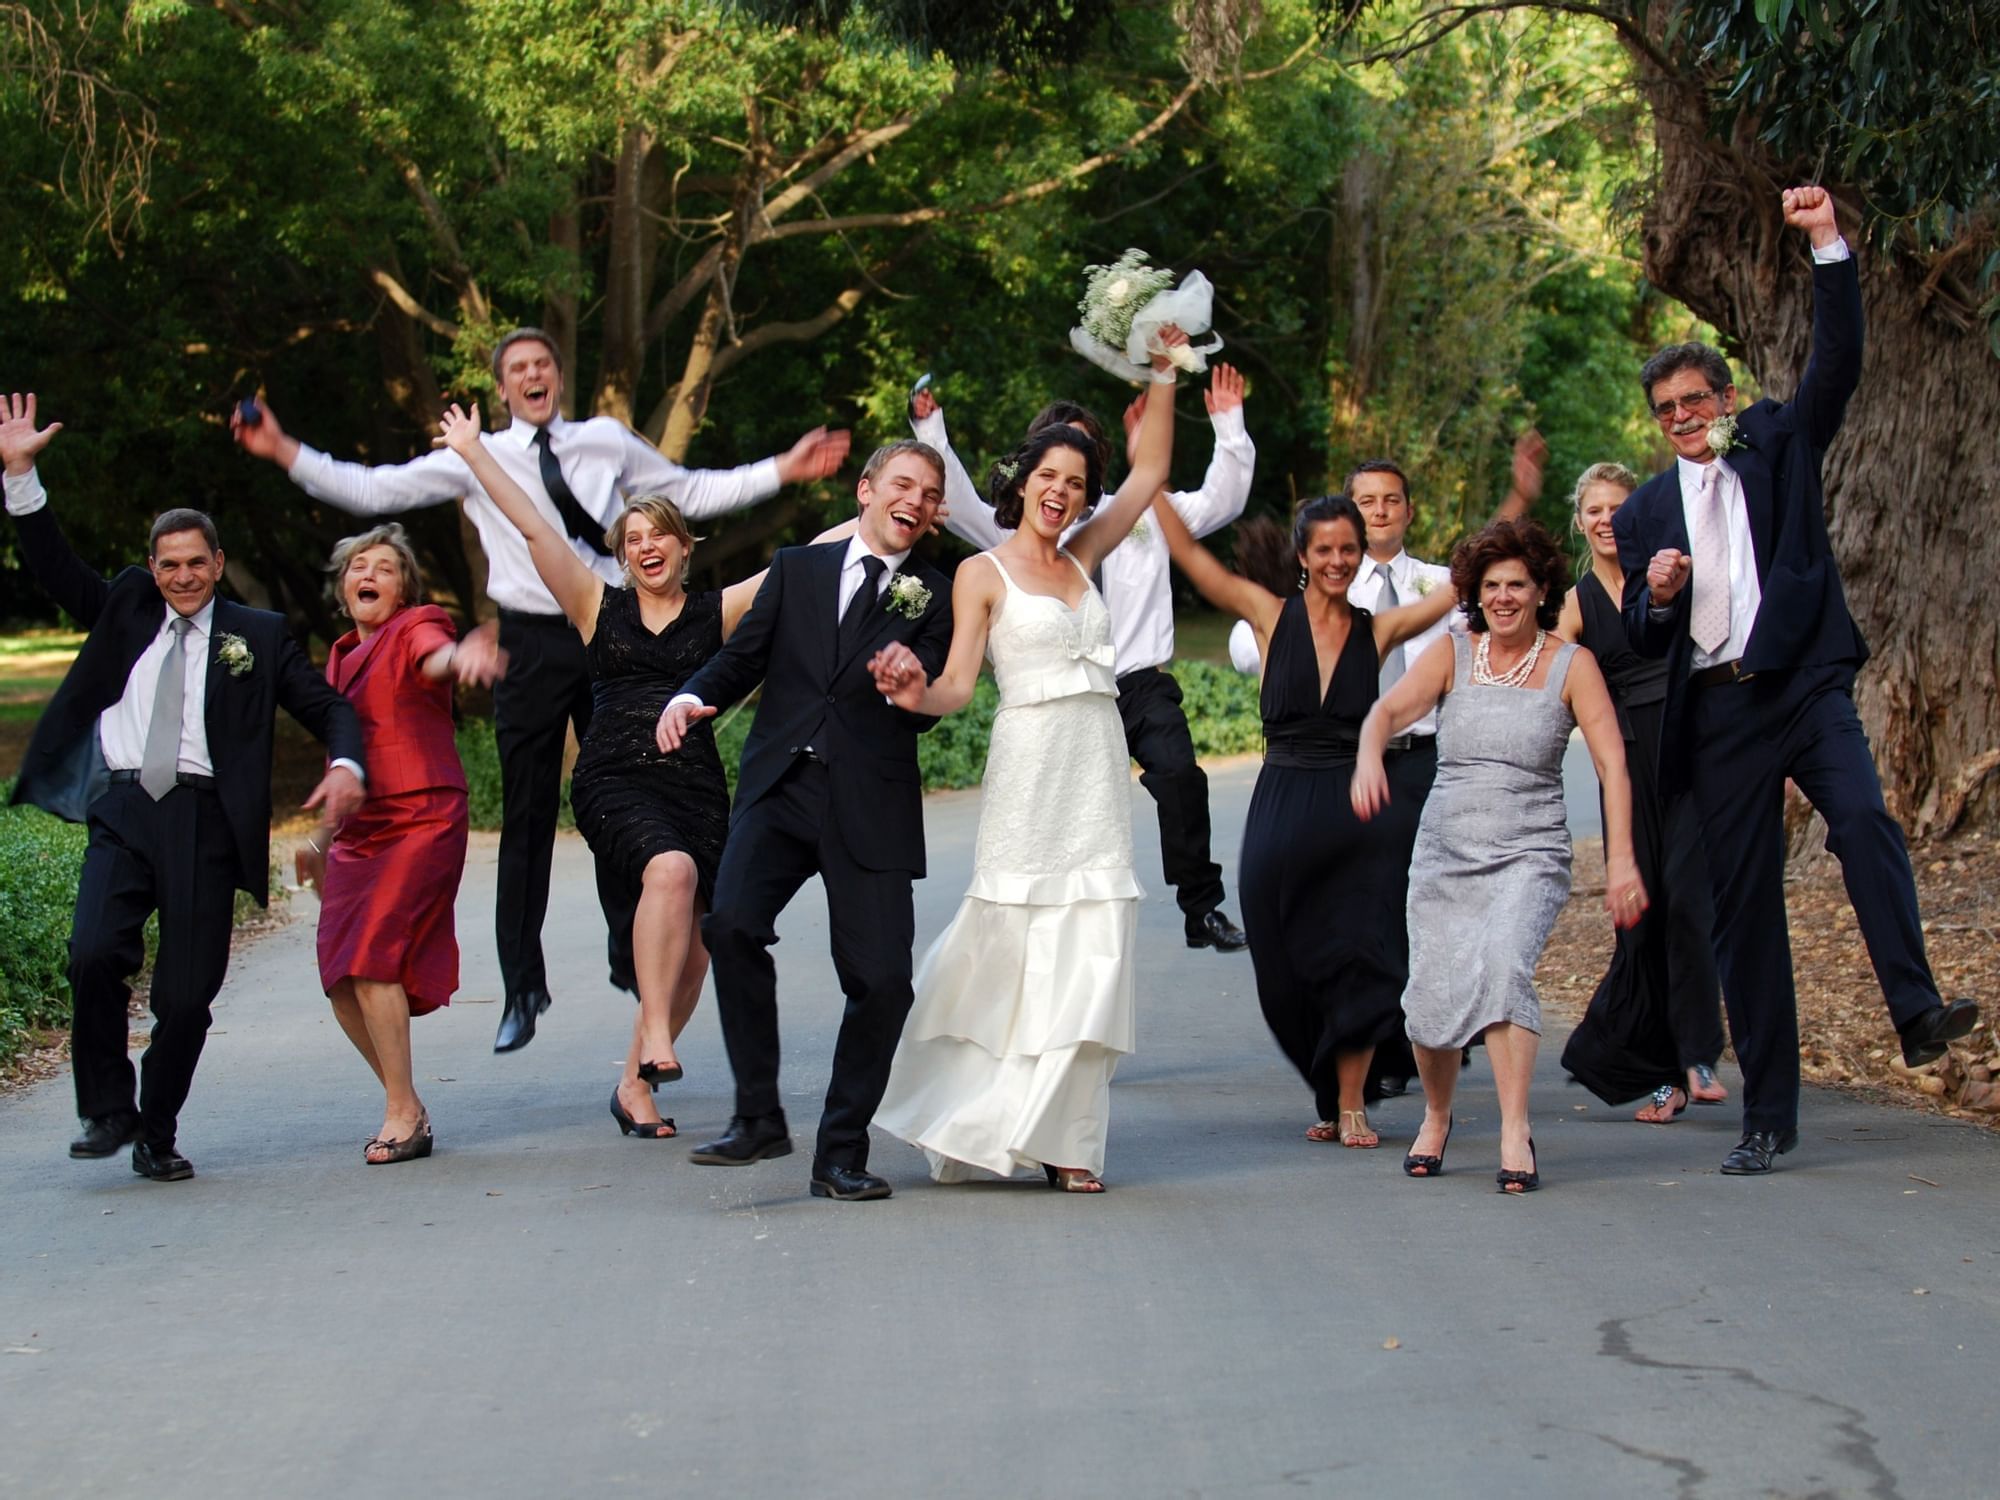 4 Tips to Take Care of your “Out of Town” Wedding Guests